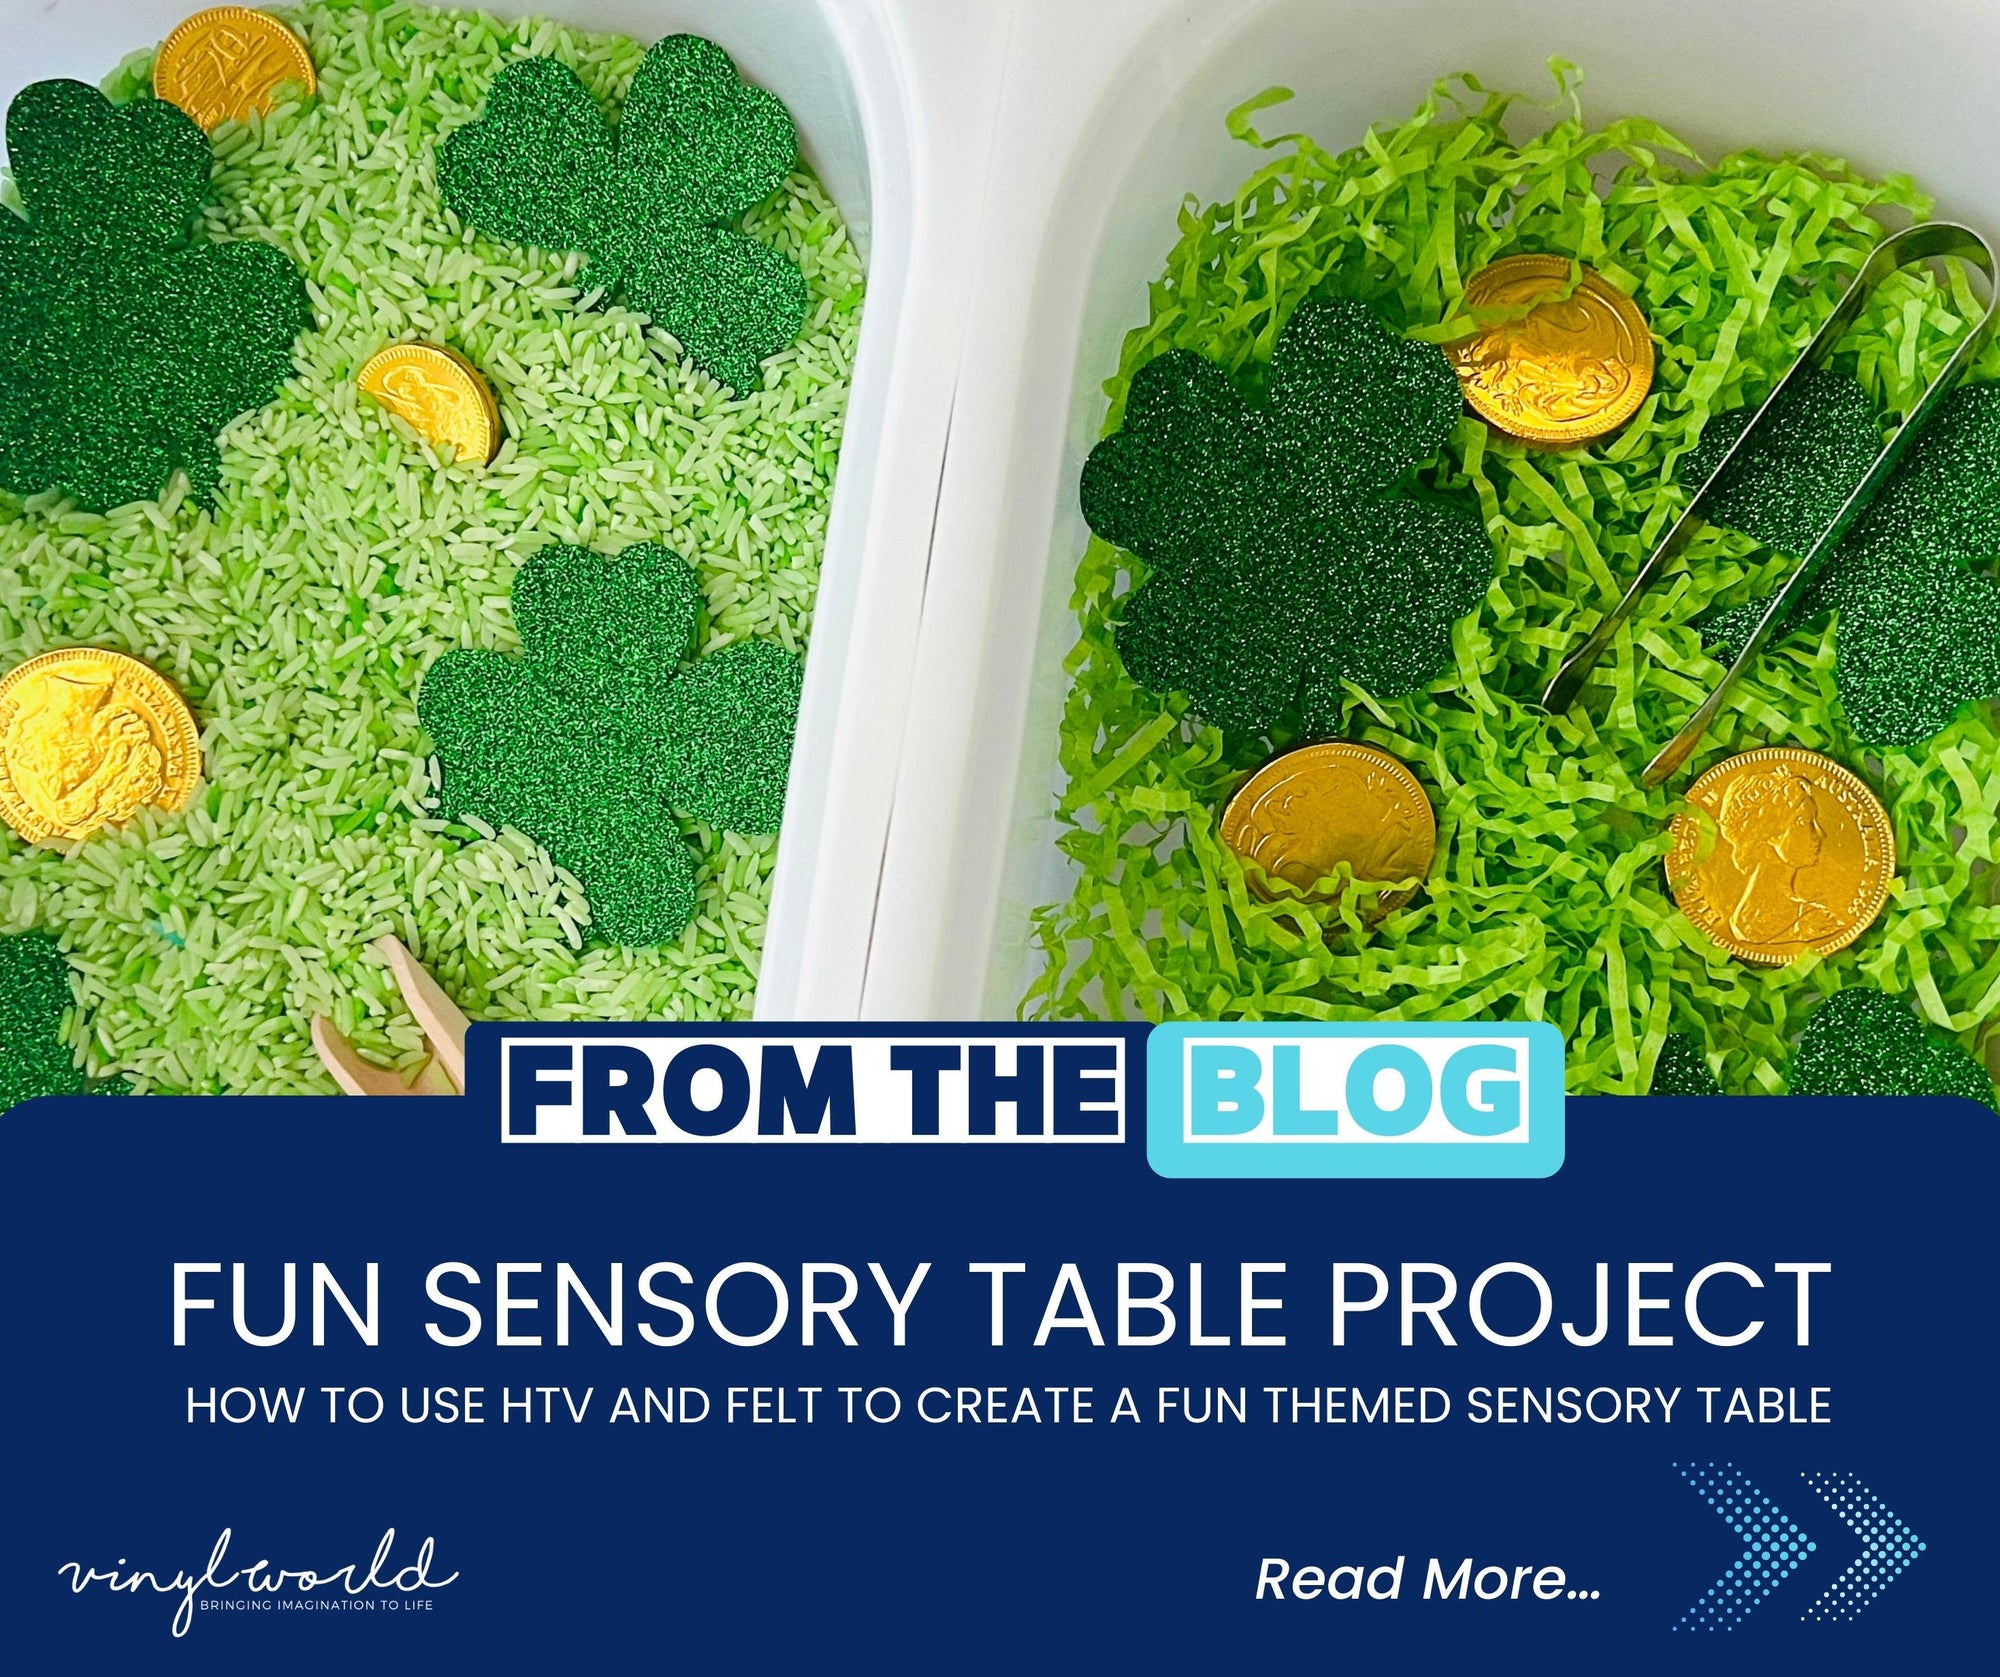 Fun Sensory Table Project: How to use HTV and Felt to create a fun themed sensory table